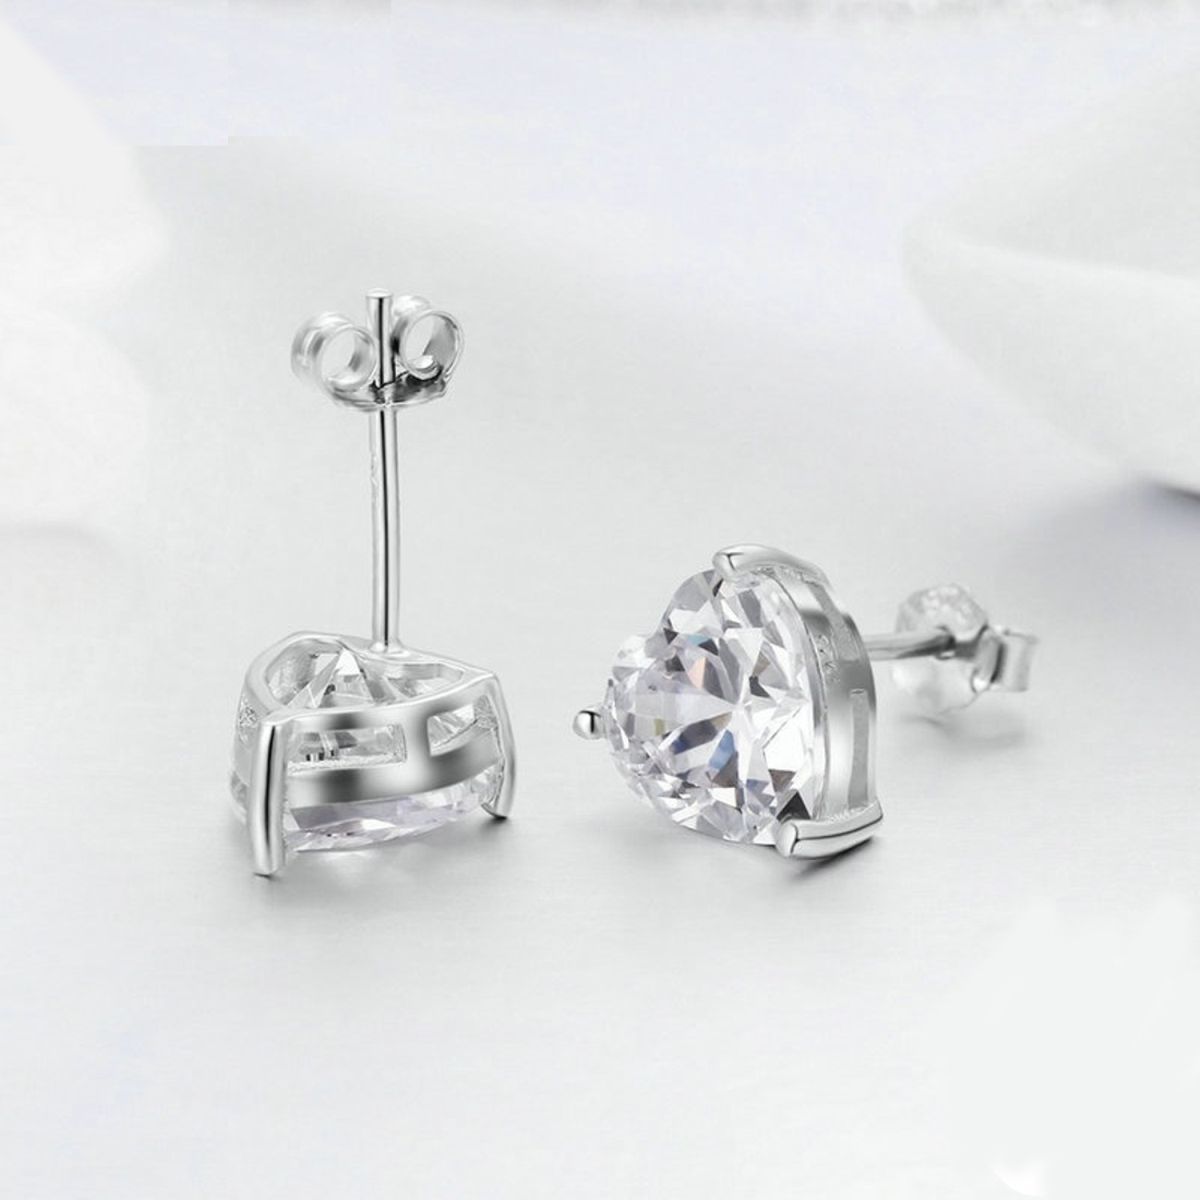 Solitaire Heart Cut Cz Stainless Steel Ear Stud Pair Earring